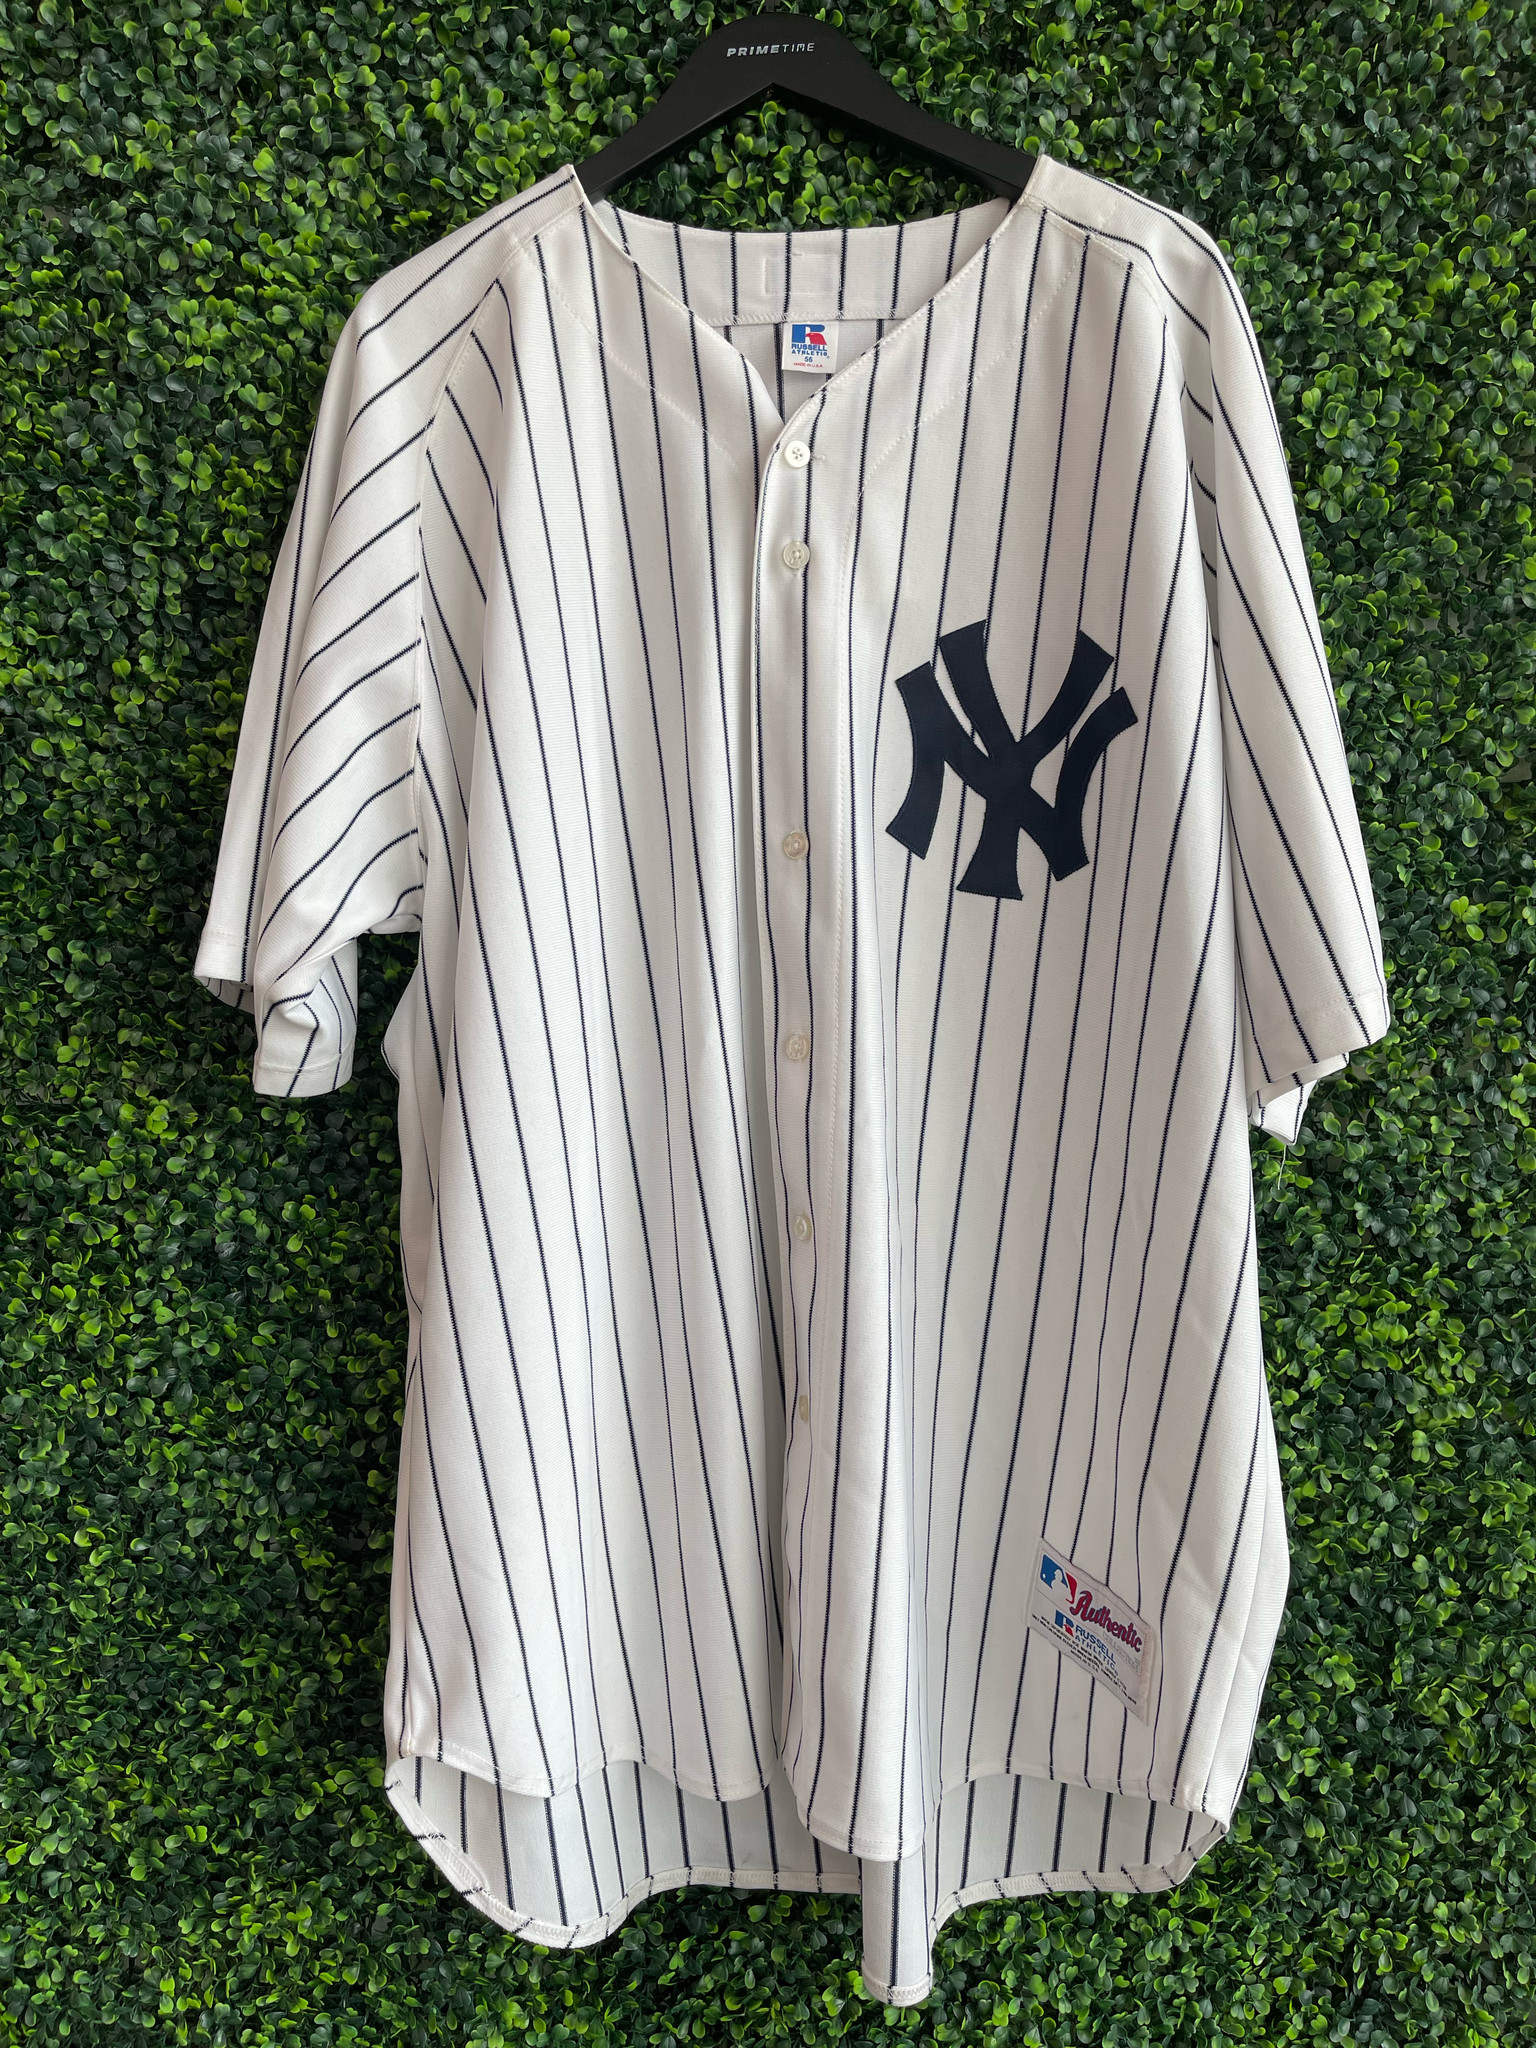 VINTAGE ALEX RODRIGUEZ #13 NY YANKEES RUSSELL ATHLETIC JERSEY